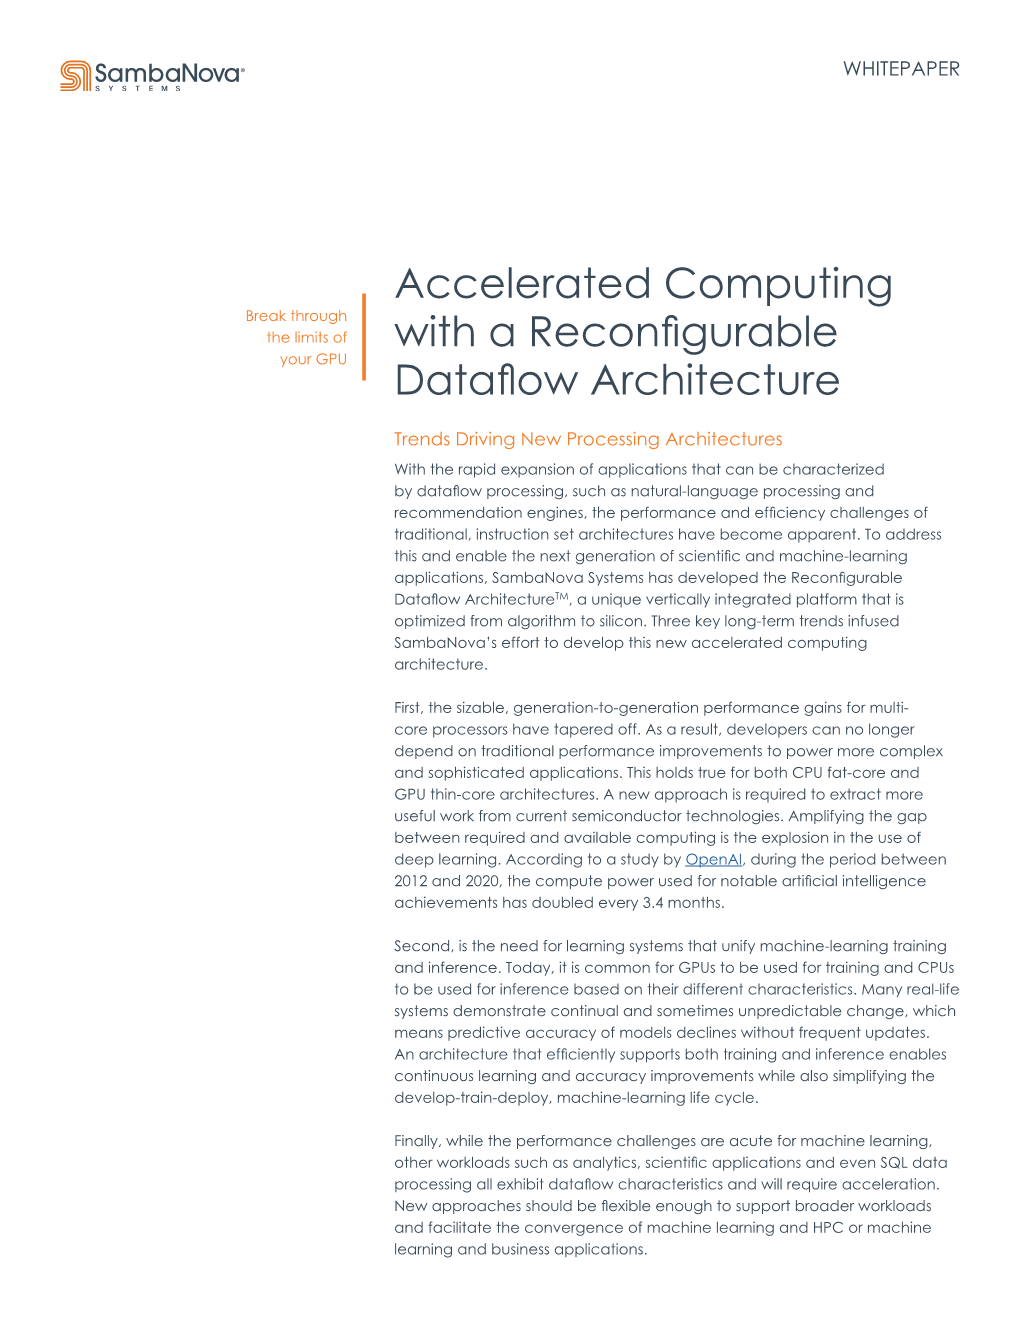 Accelerated Computing with a Reconfigurable Dataflow Architecture